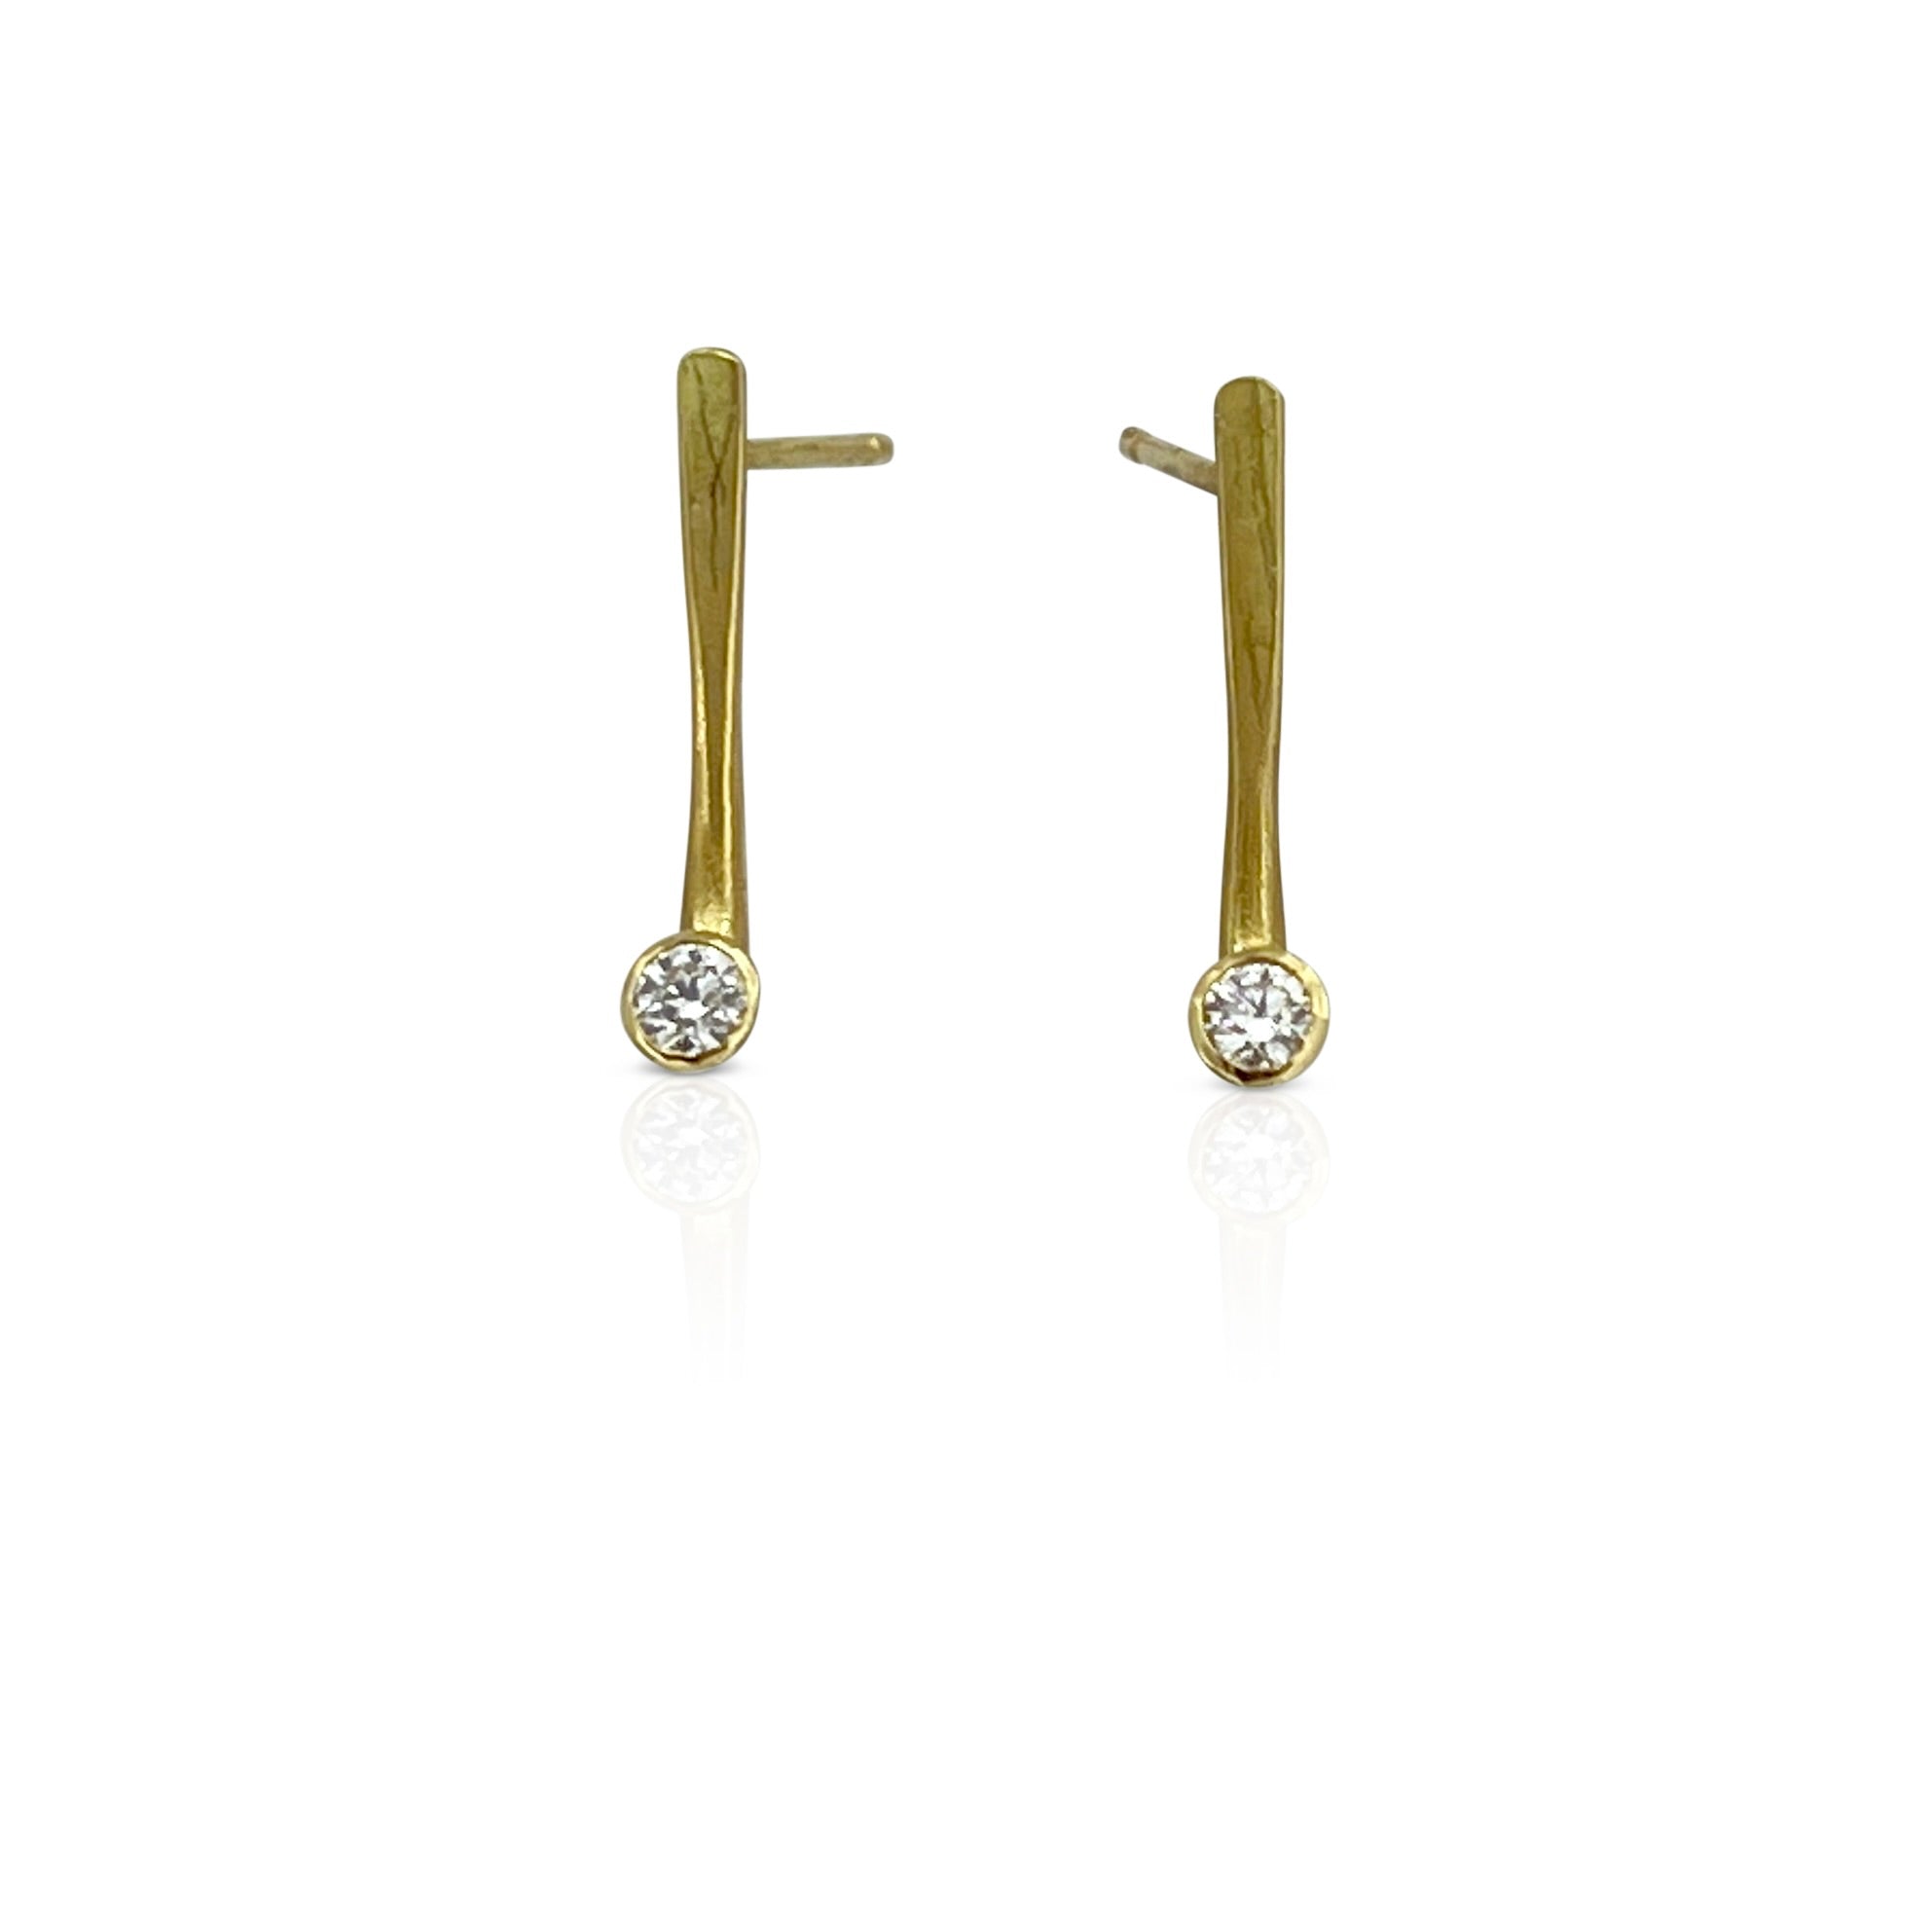 Earring with removable aquamarine charm in 18K gold with diamonds by Ayesha Mayadas